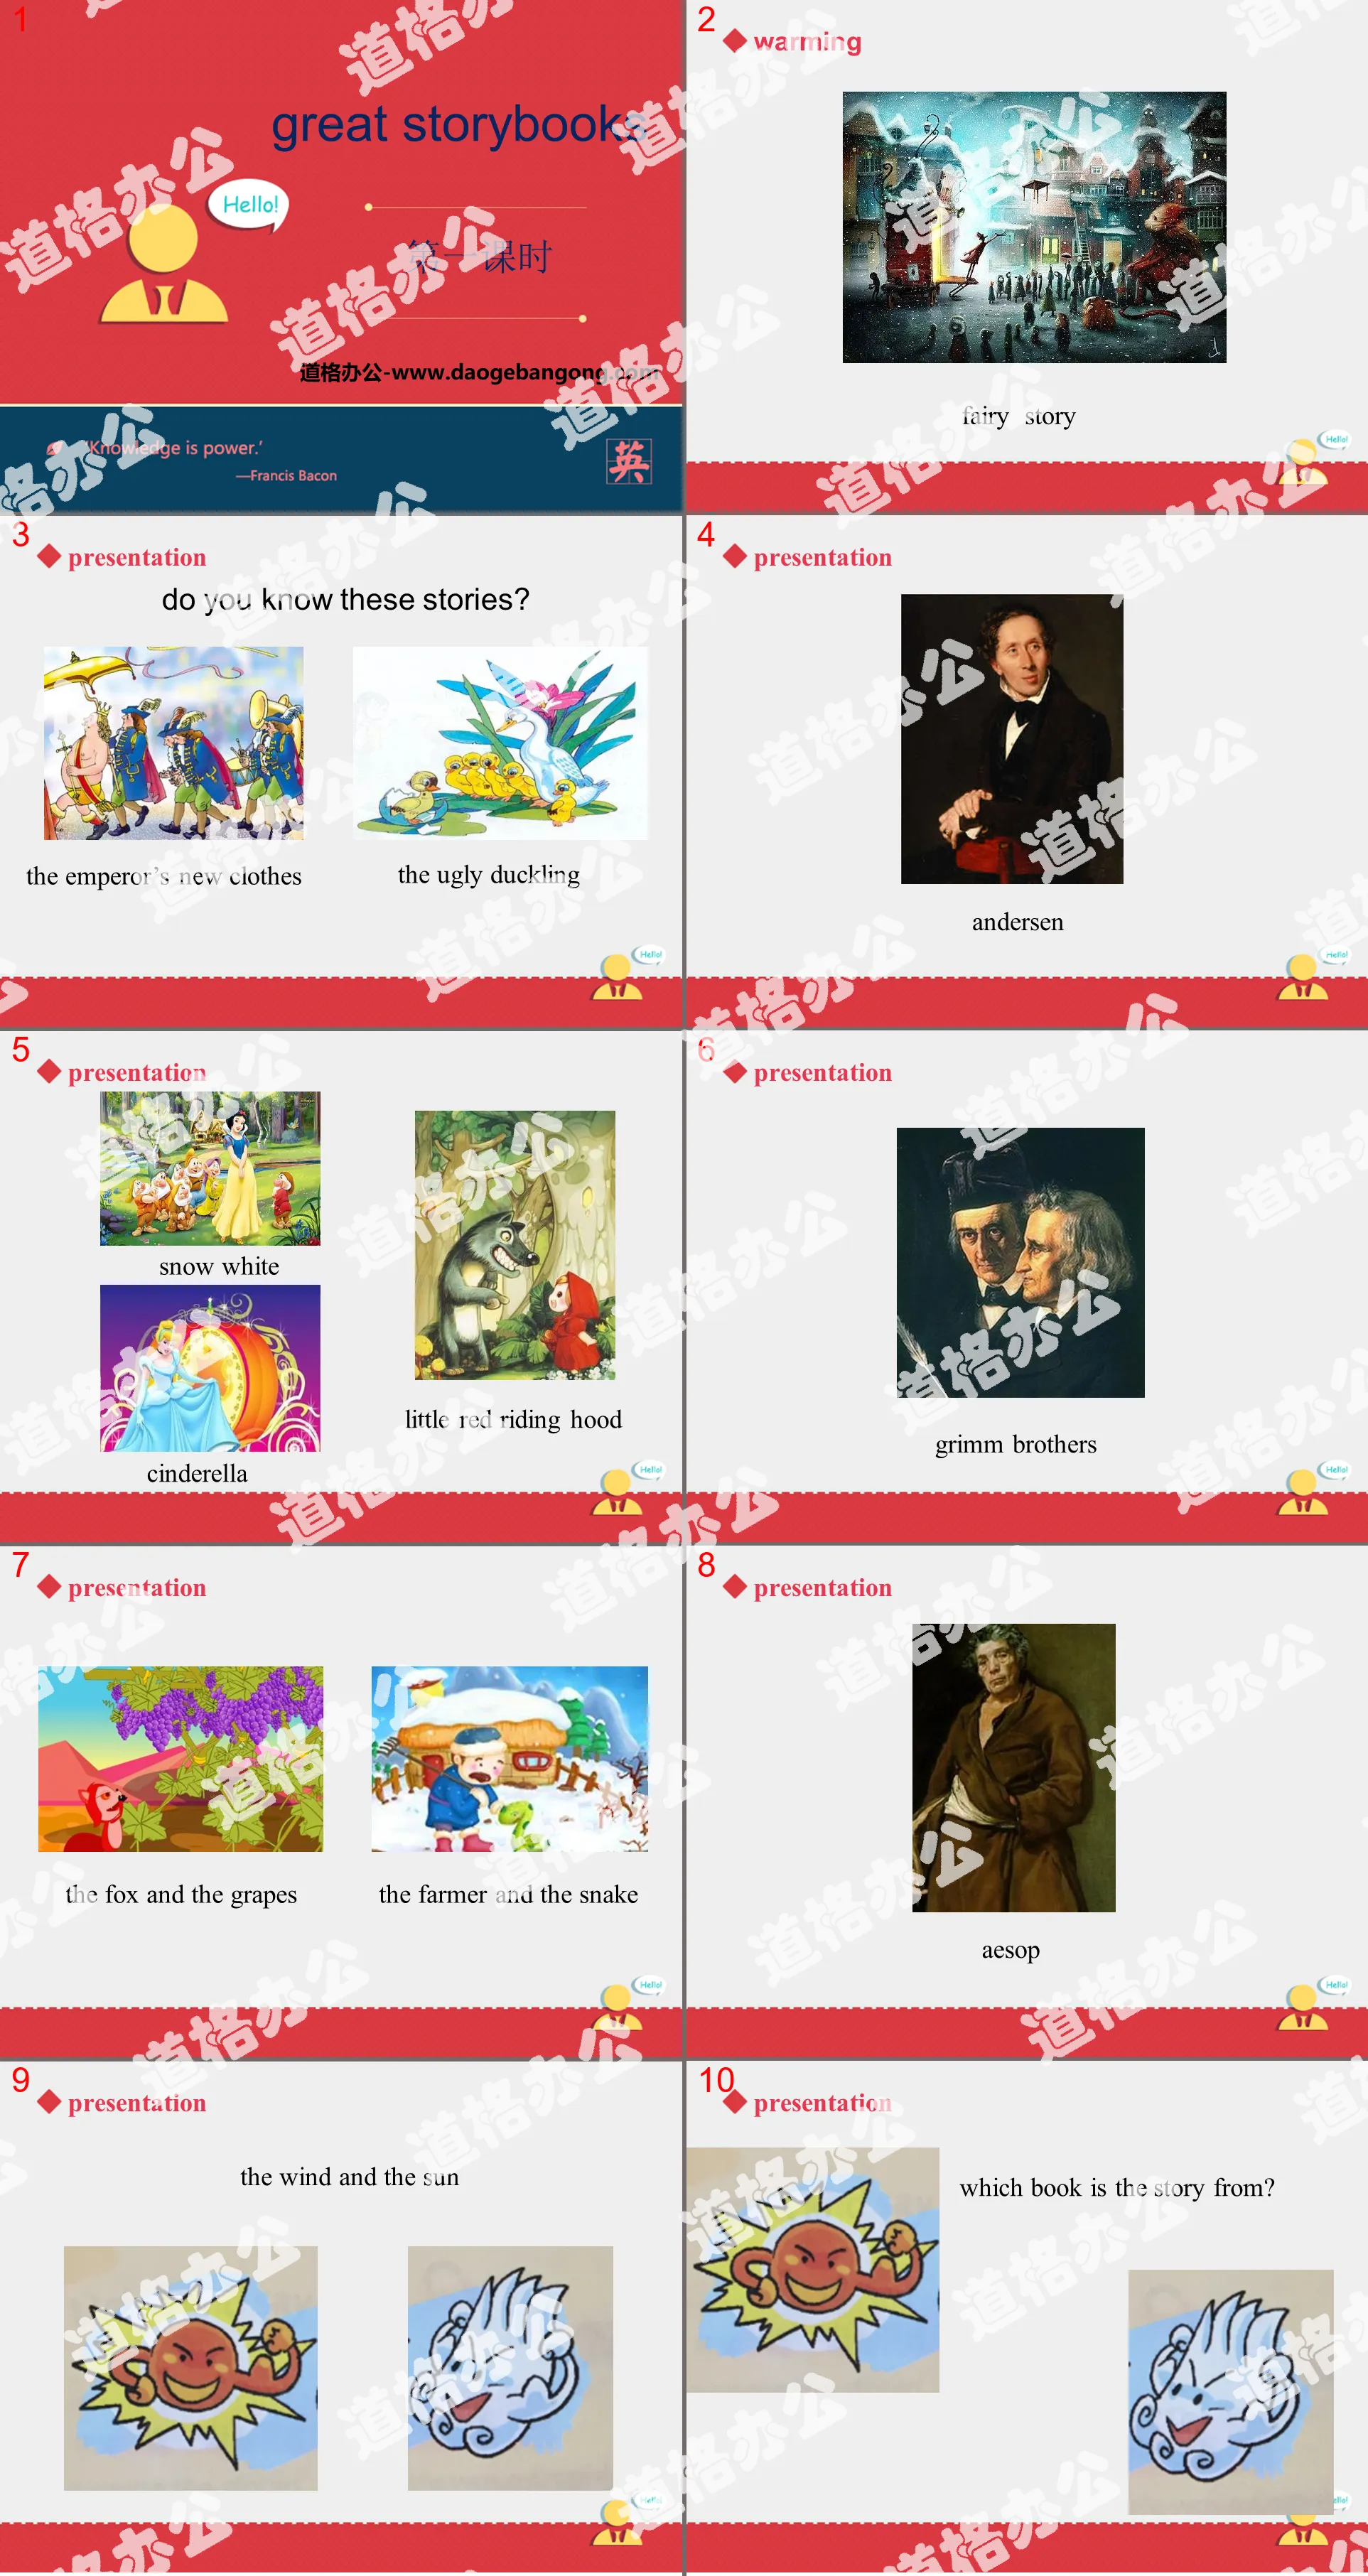 《Great storybooks》PPT
